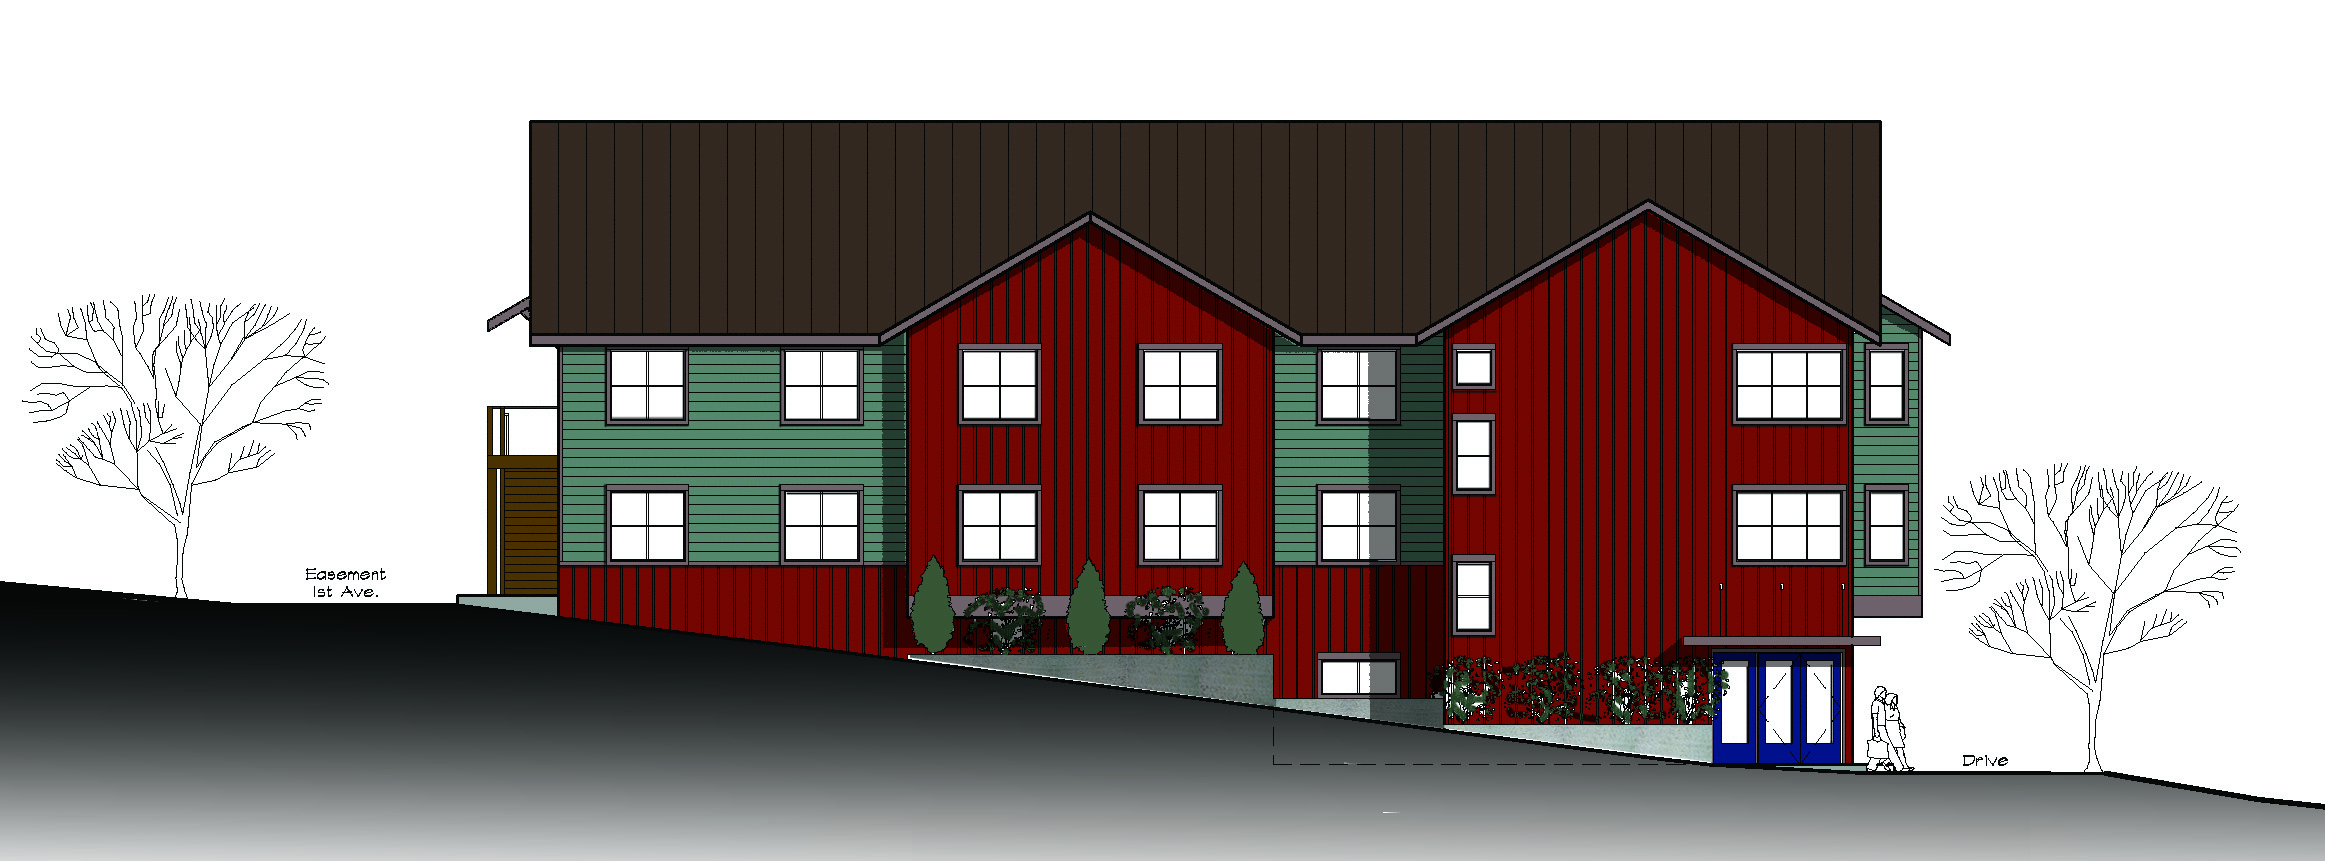 SSEATEC-Student-Housing-Elevation Color